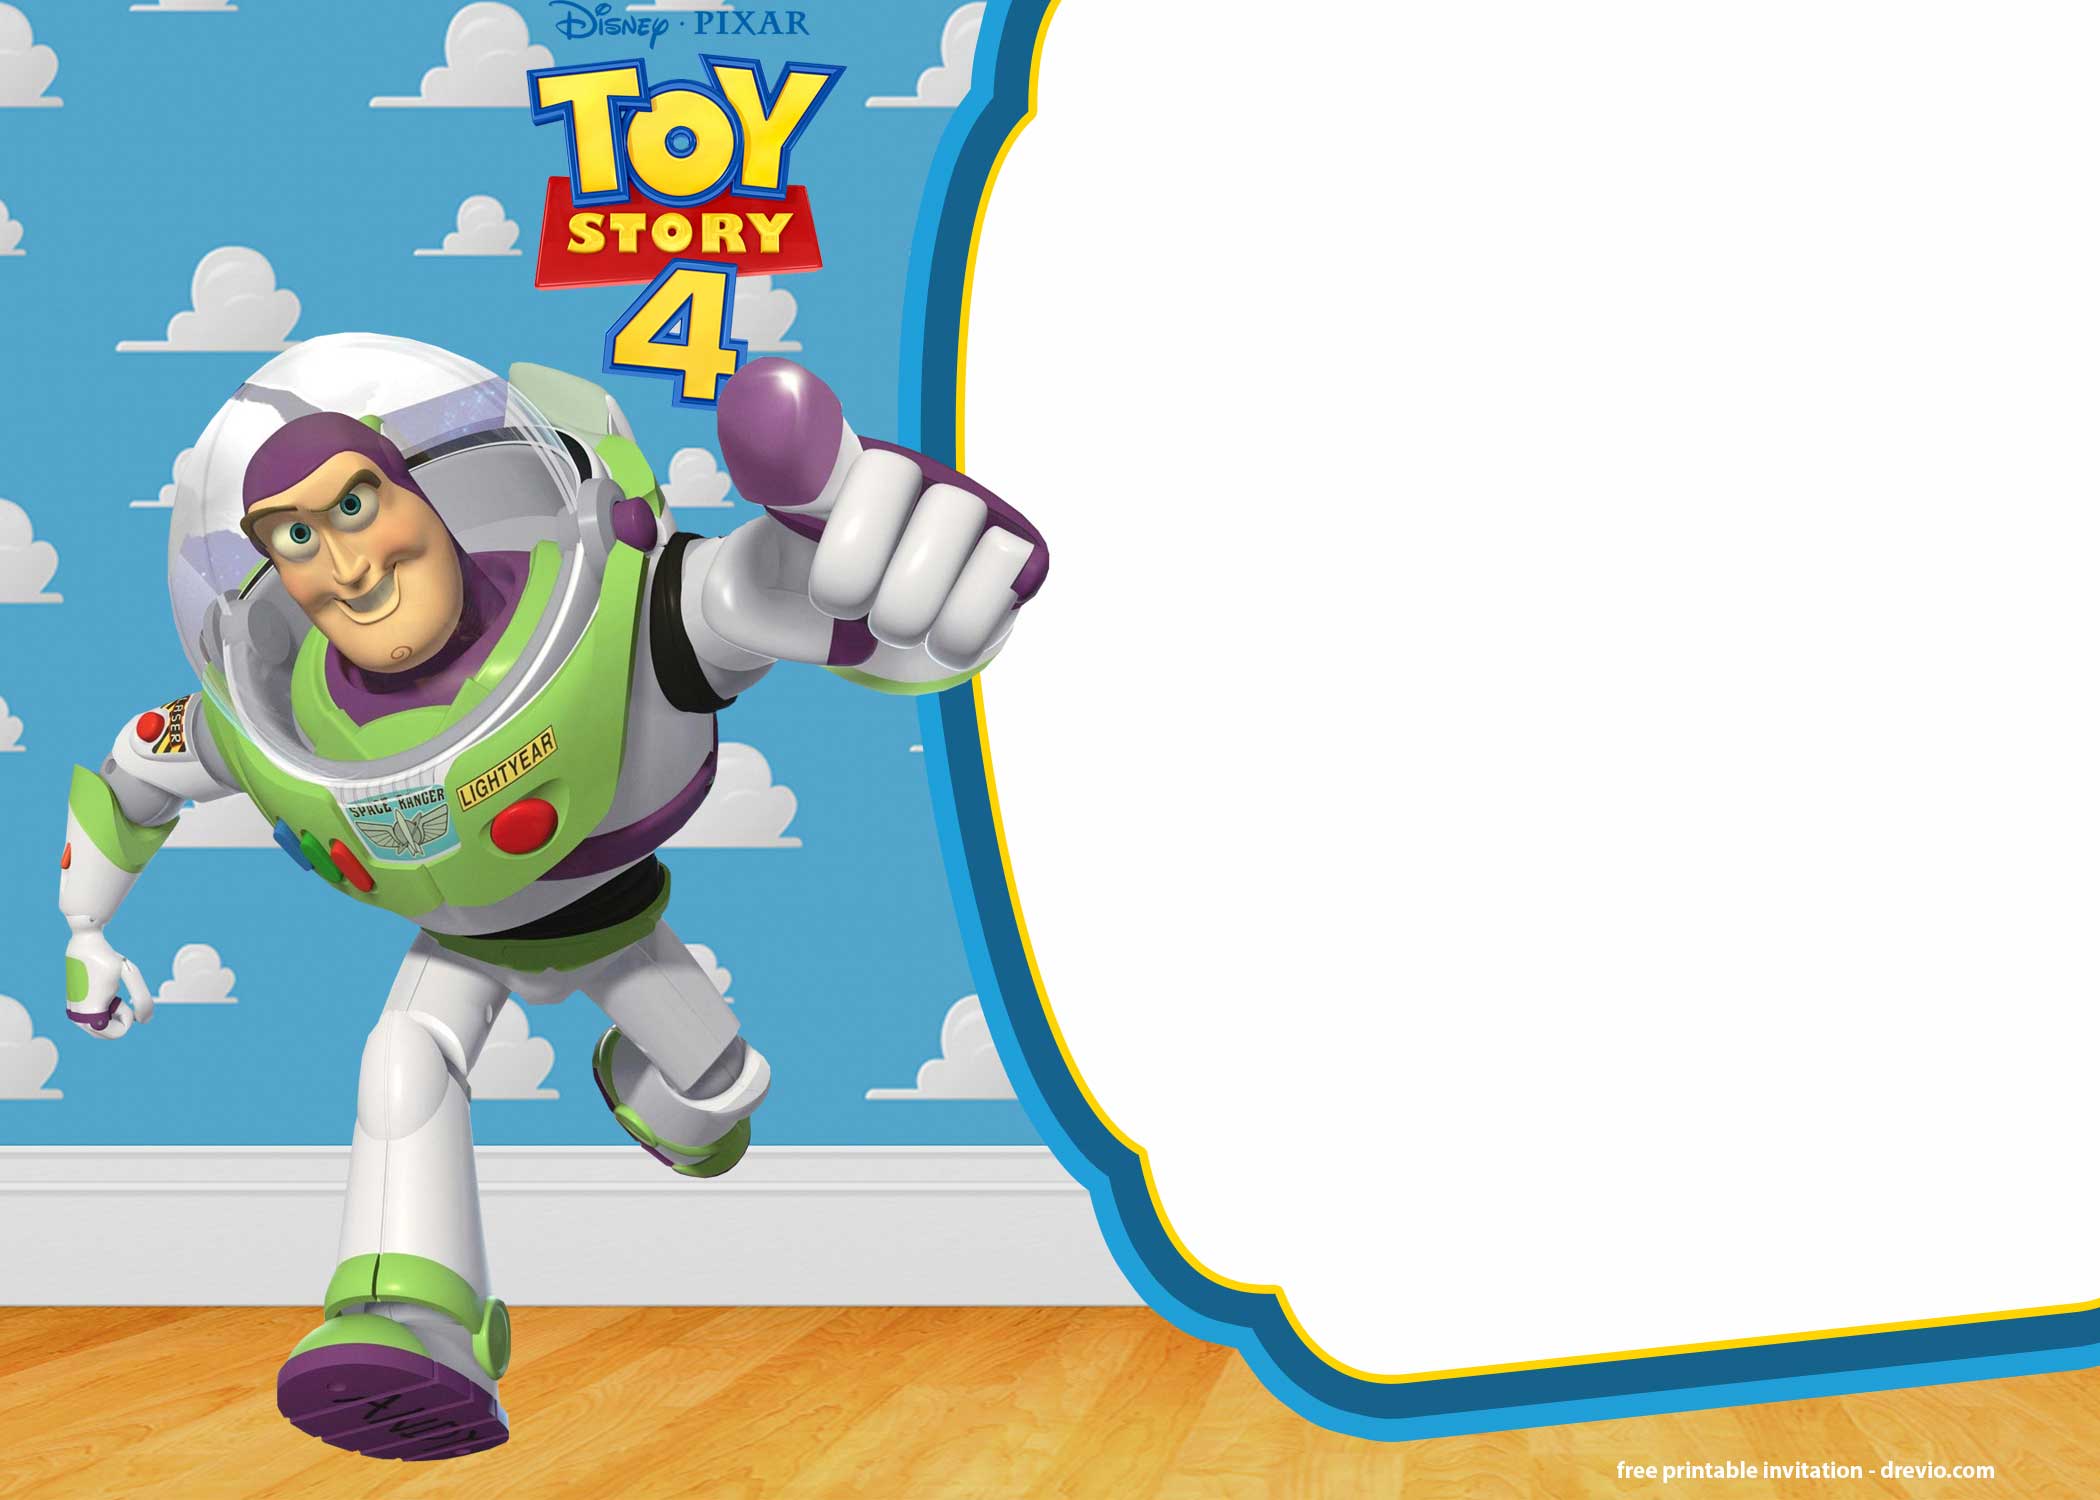 FREE Printable Toy Story 4 Invitation Templates Download Hundreds